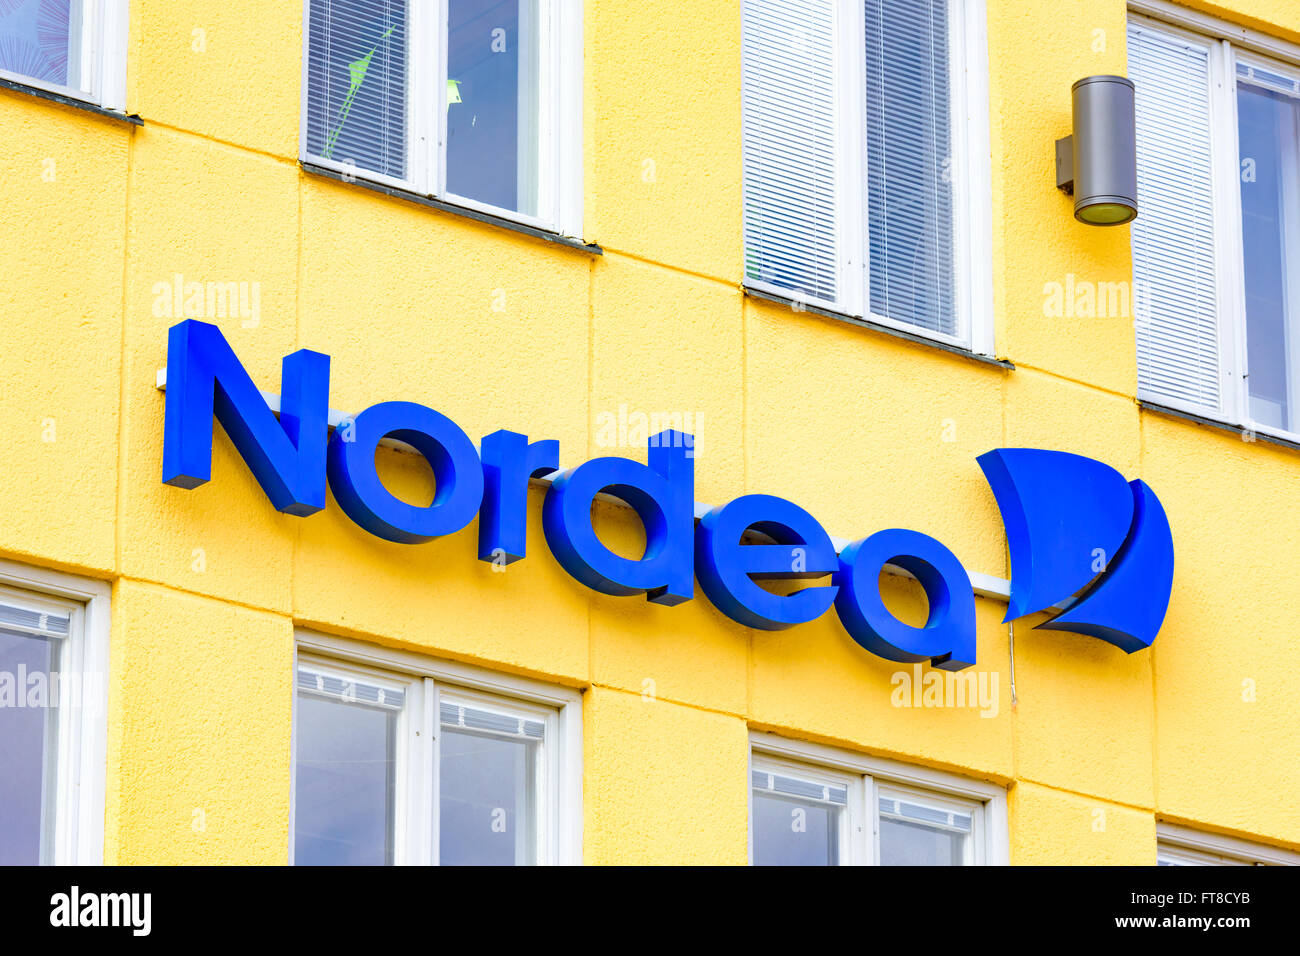 Kristianstad, Sweden - March 20, 2016: Nordea is one of the major banks in Sweden. Here is their logo found as a sign above a ba Stock Photo